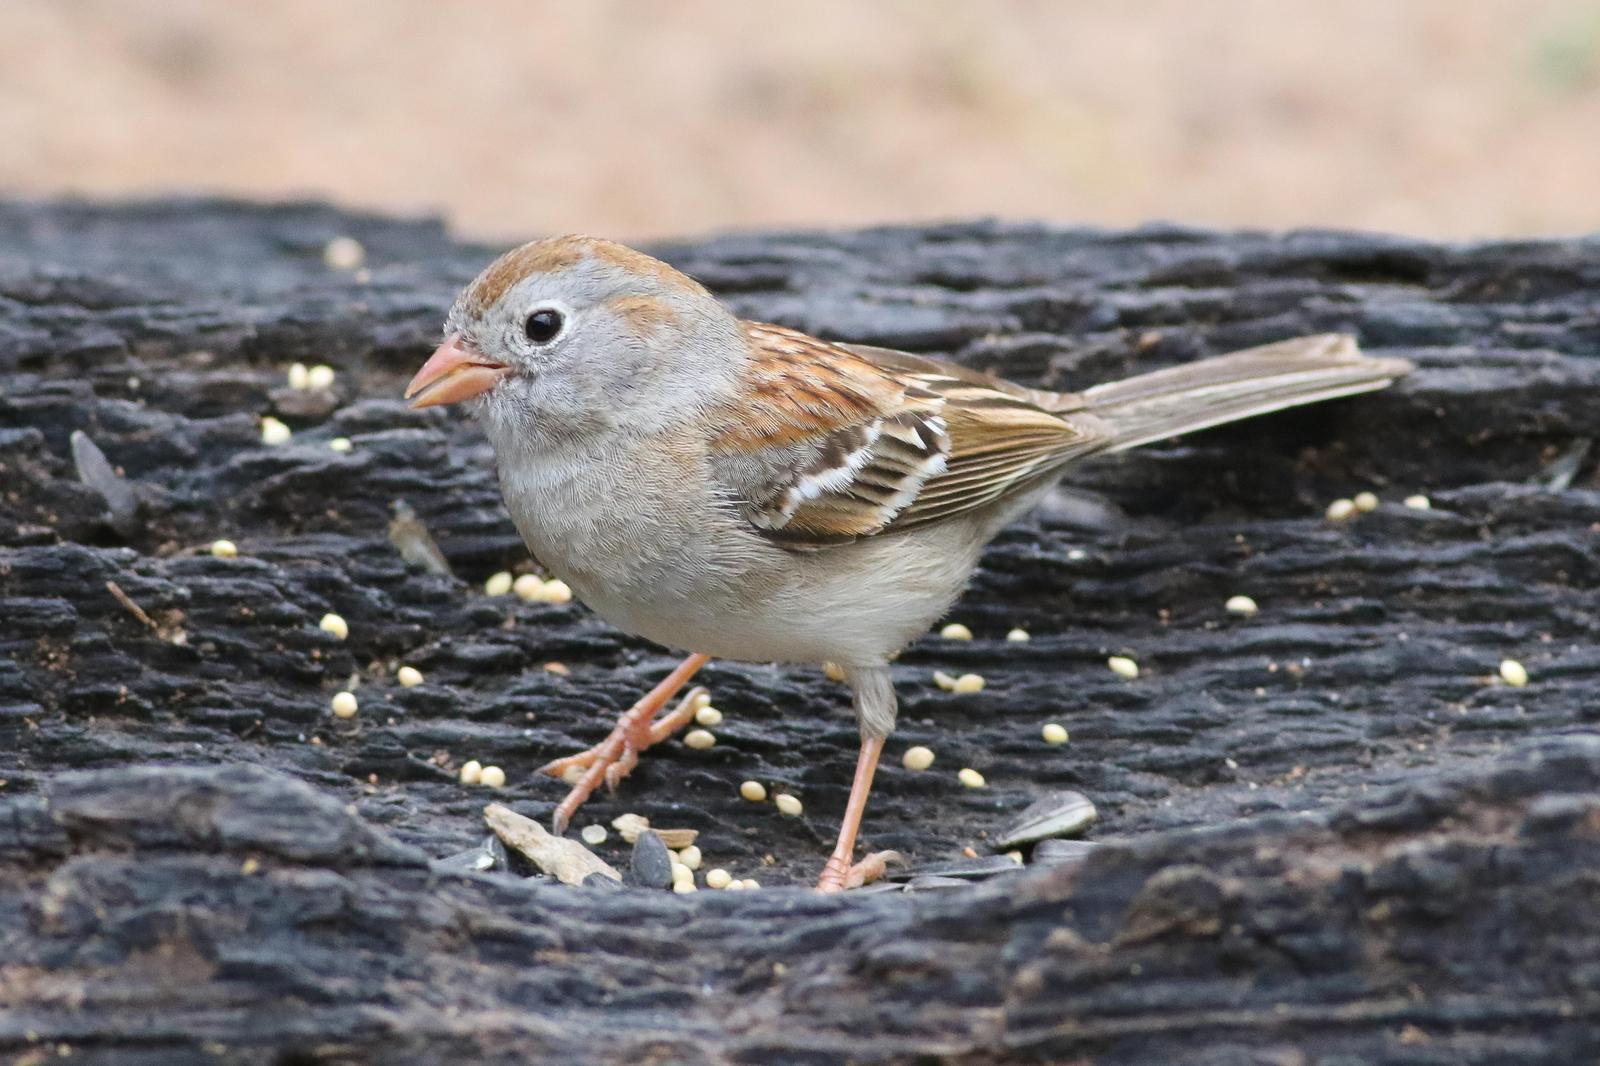 Field Sparrow Photo by Tom Ford-Hutchinson